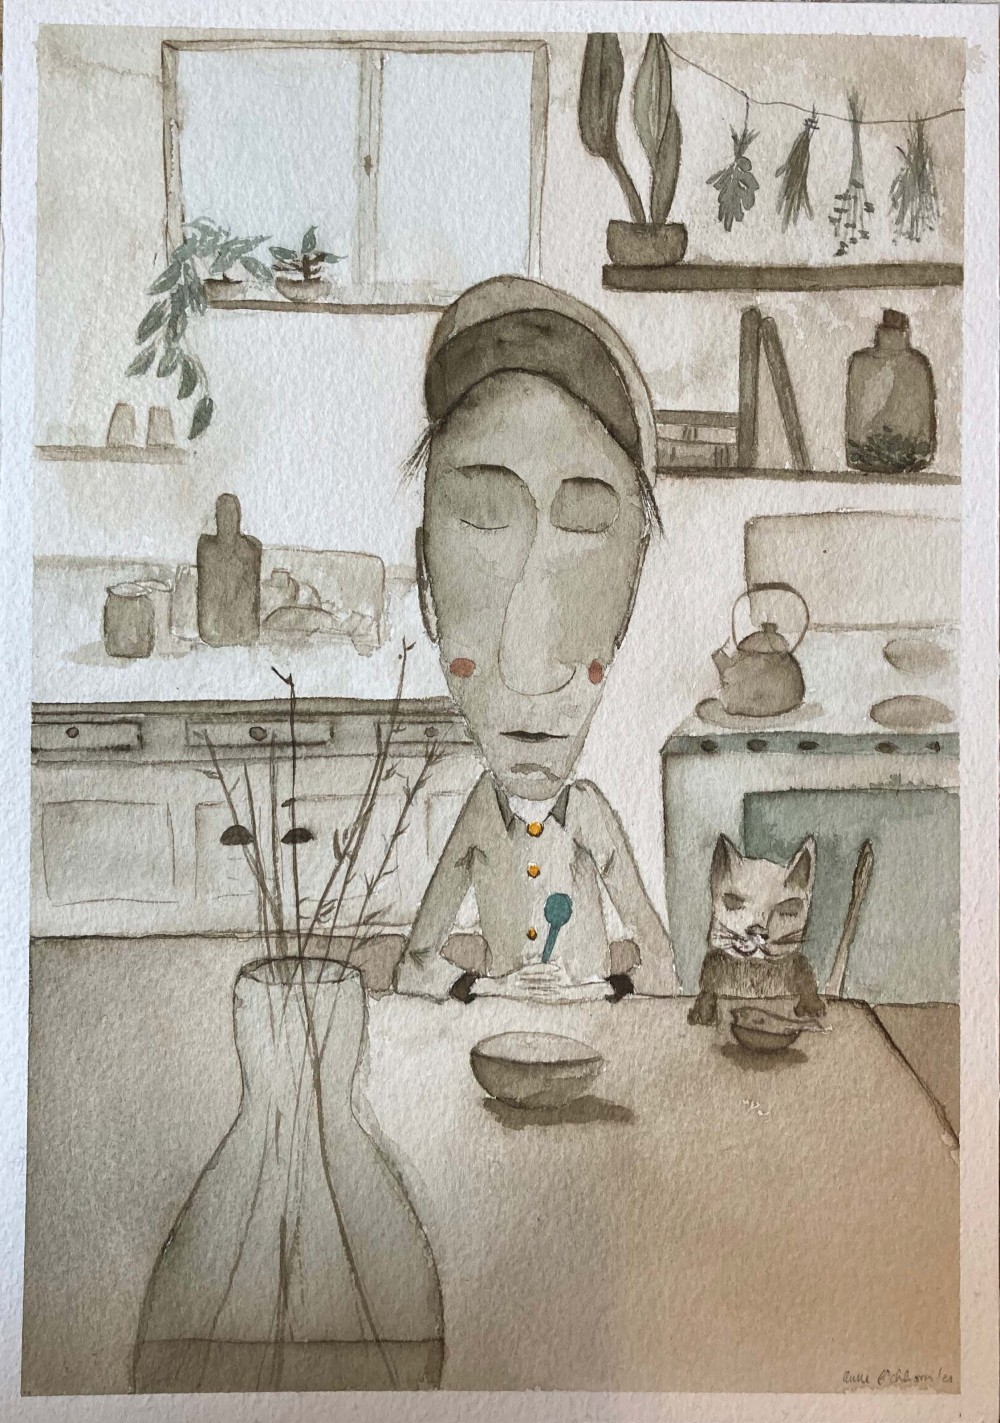 I'll be in the kitchen | 2021 | 18x24cm | watercolor